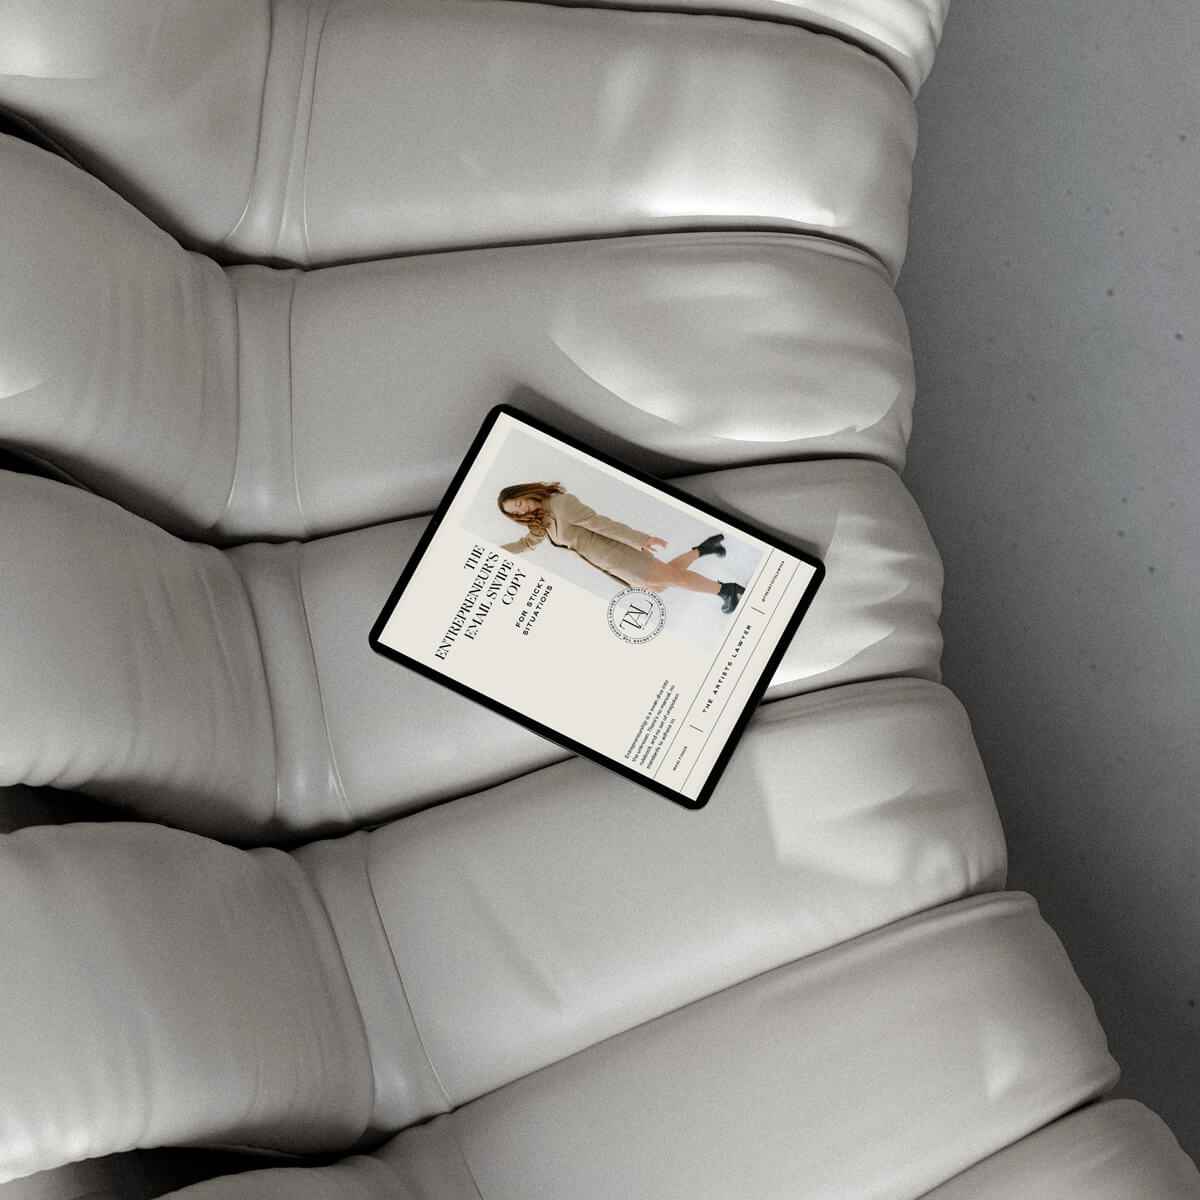 Ipad showing the entrepreneurs email swipe copy, laying on a beige couch.